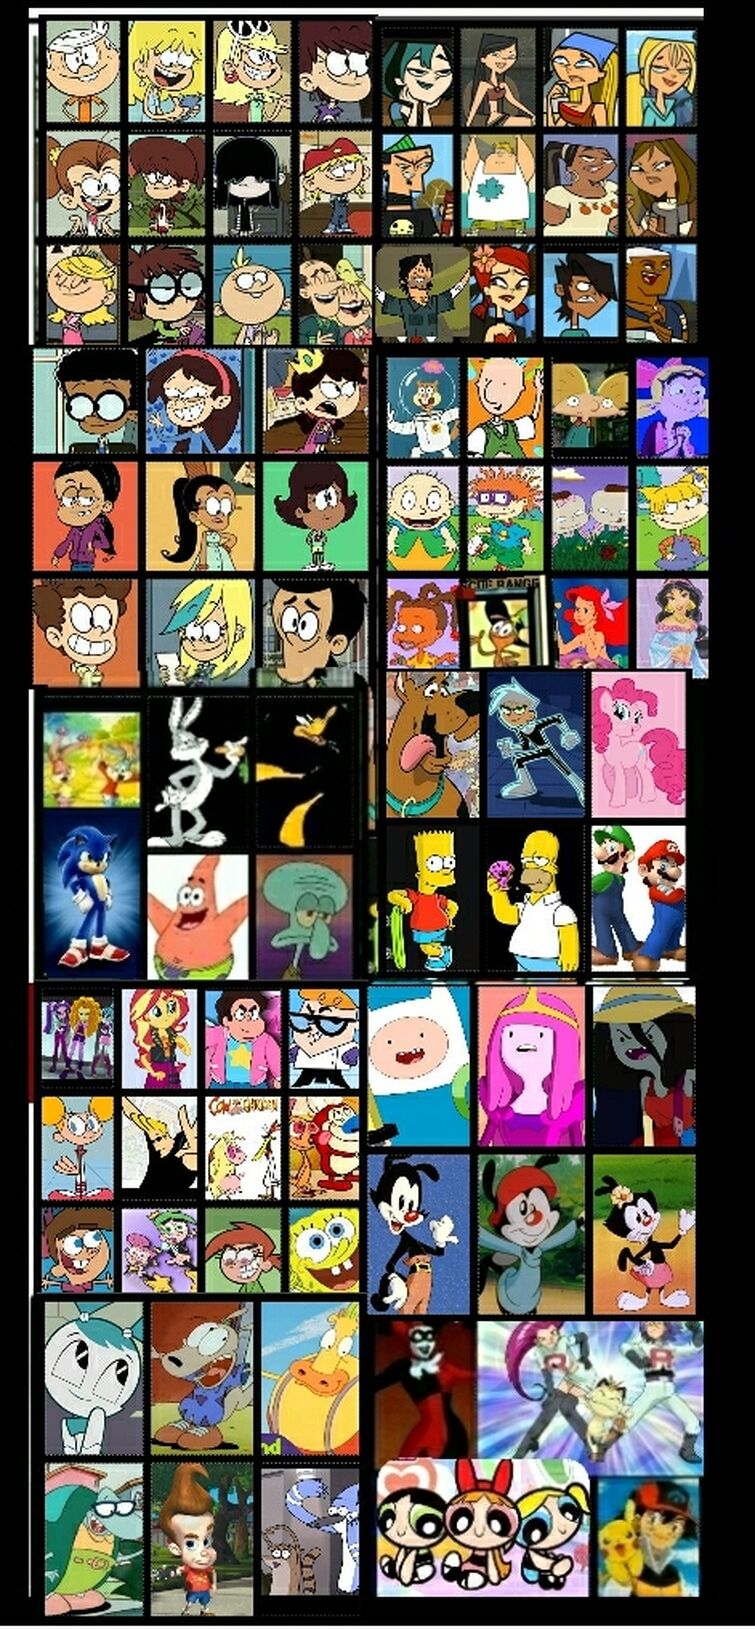 57 Iconic Cartoon Characters of all time! [The Ultimate List] - Animaker